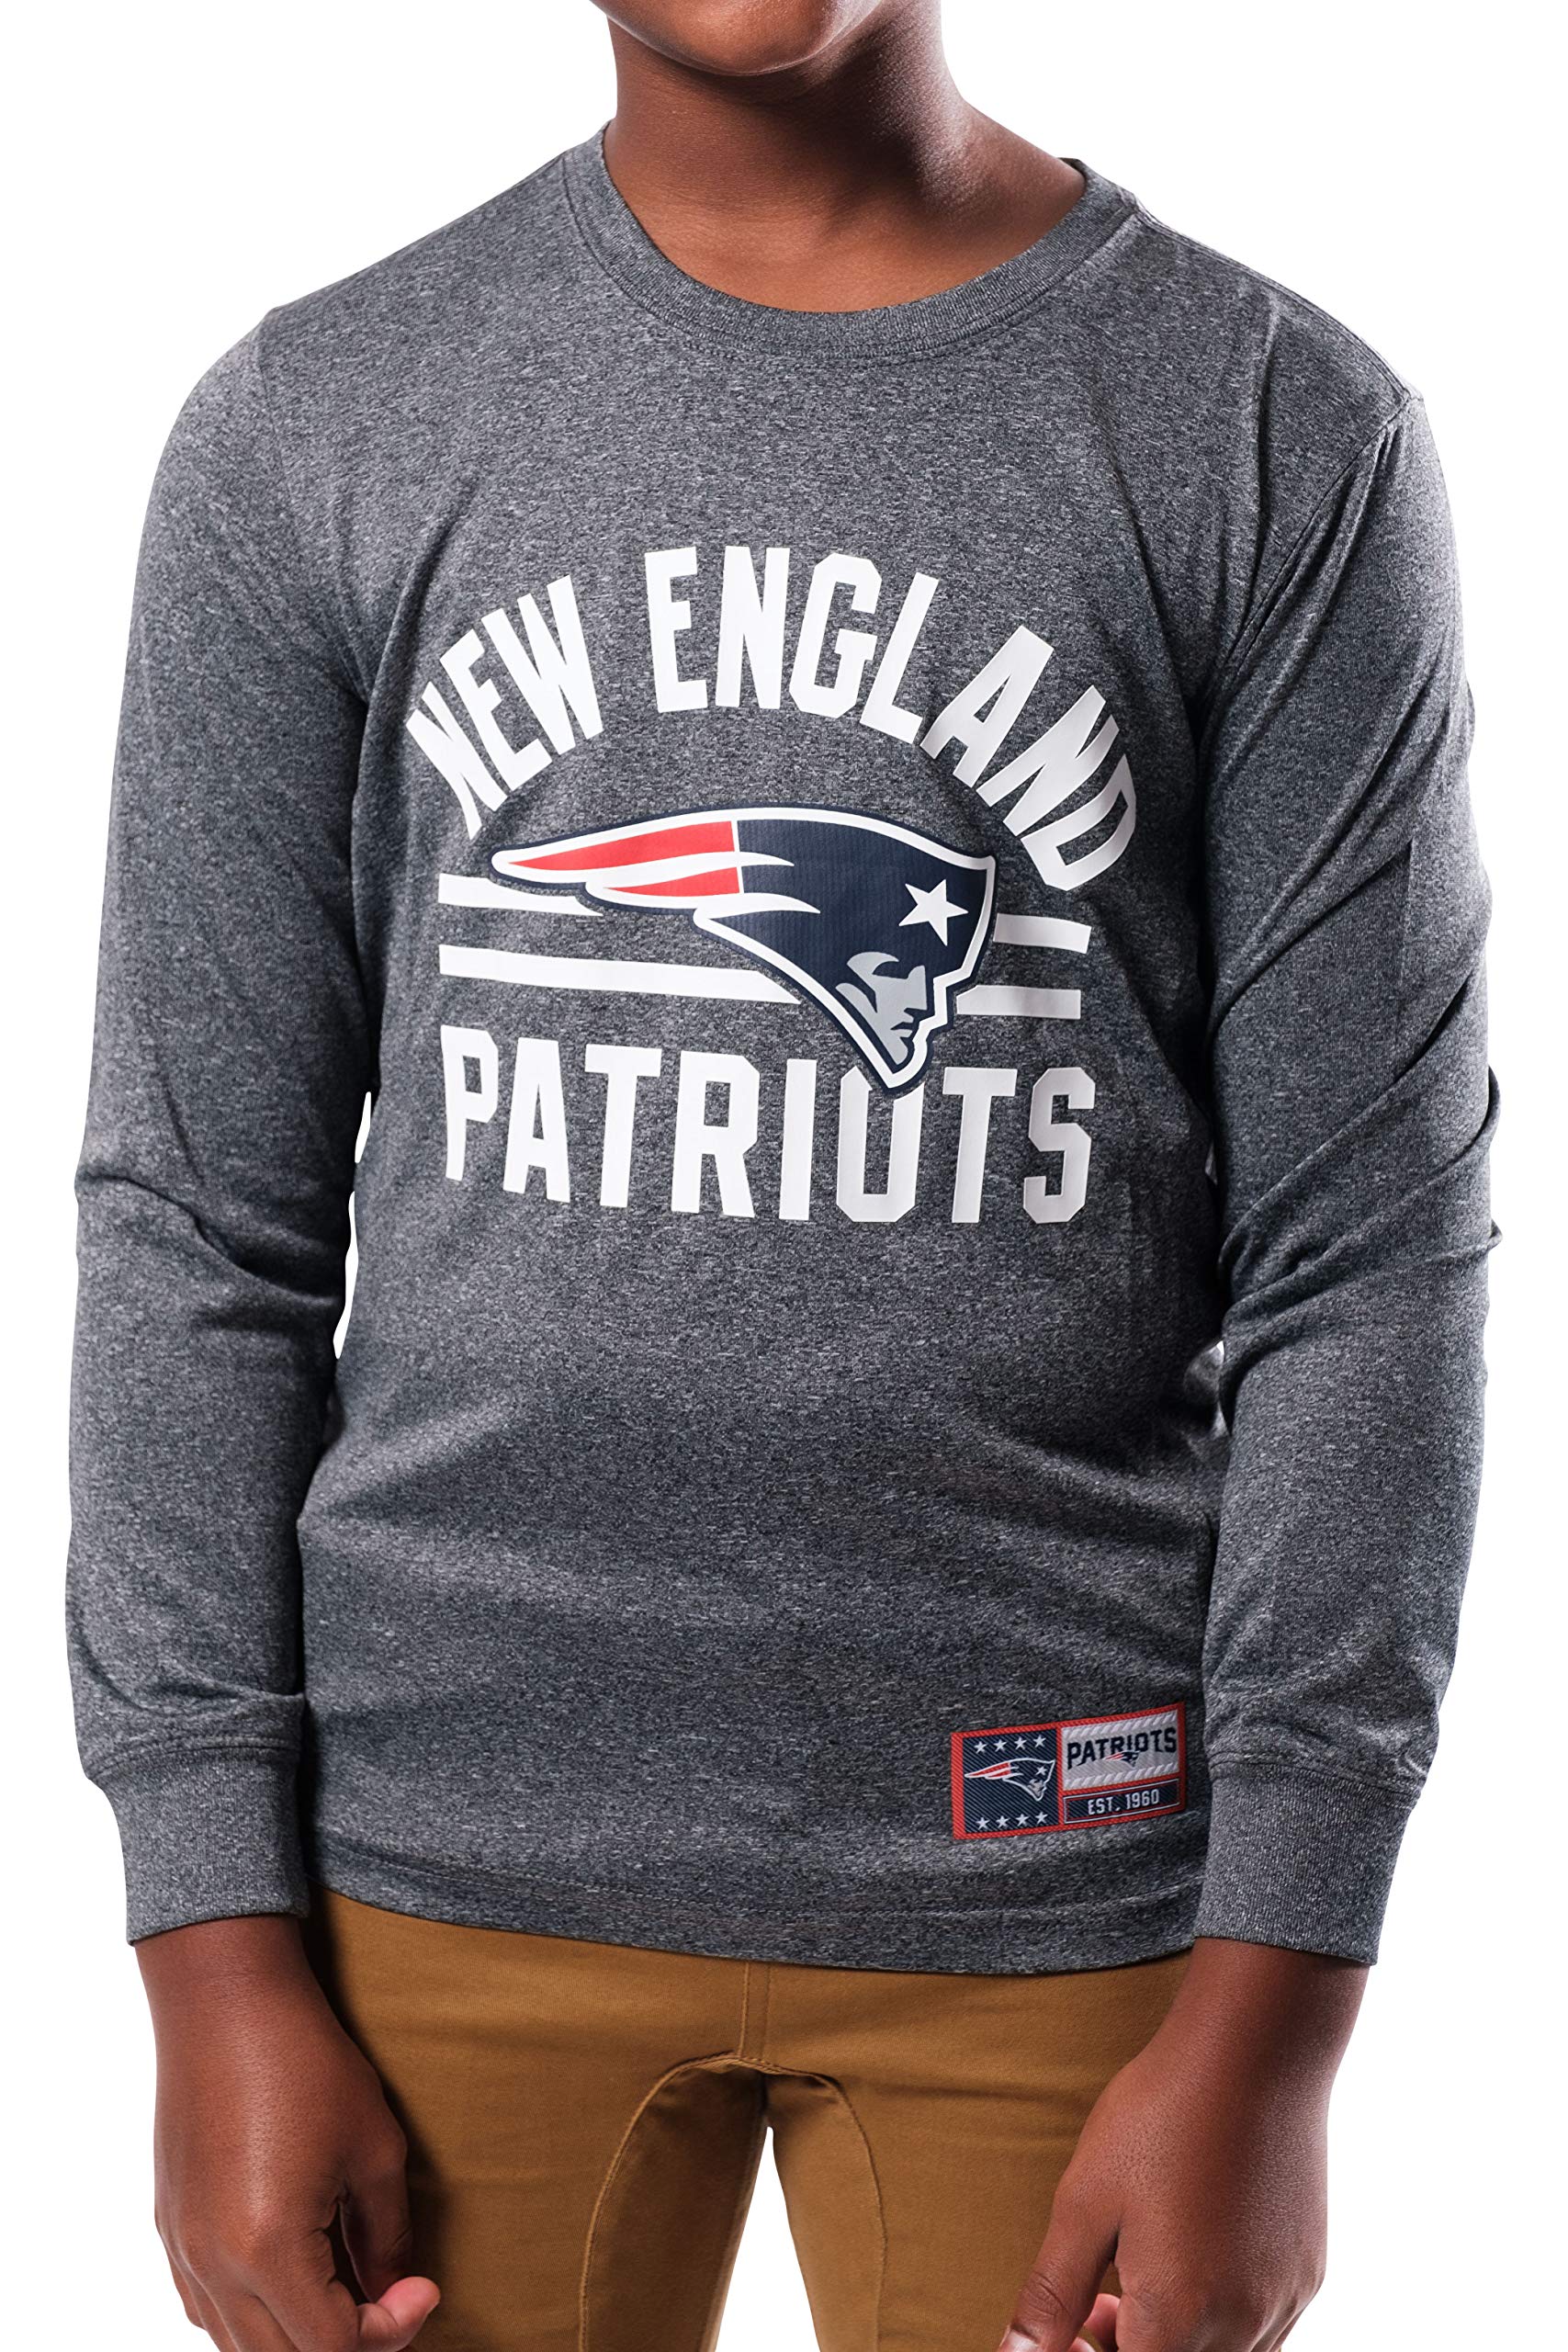 Ultra Game NFL New England Patriots Youth Super Soft Supreme Long Sleeve T-Shirt|New England Patriots